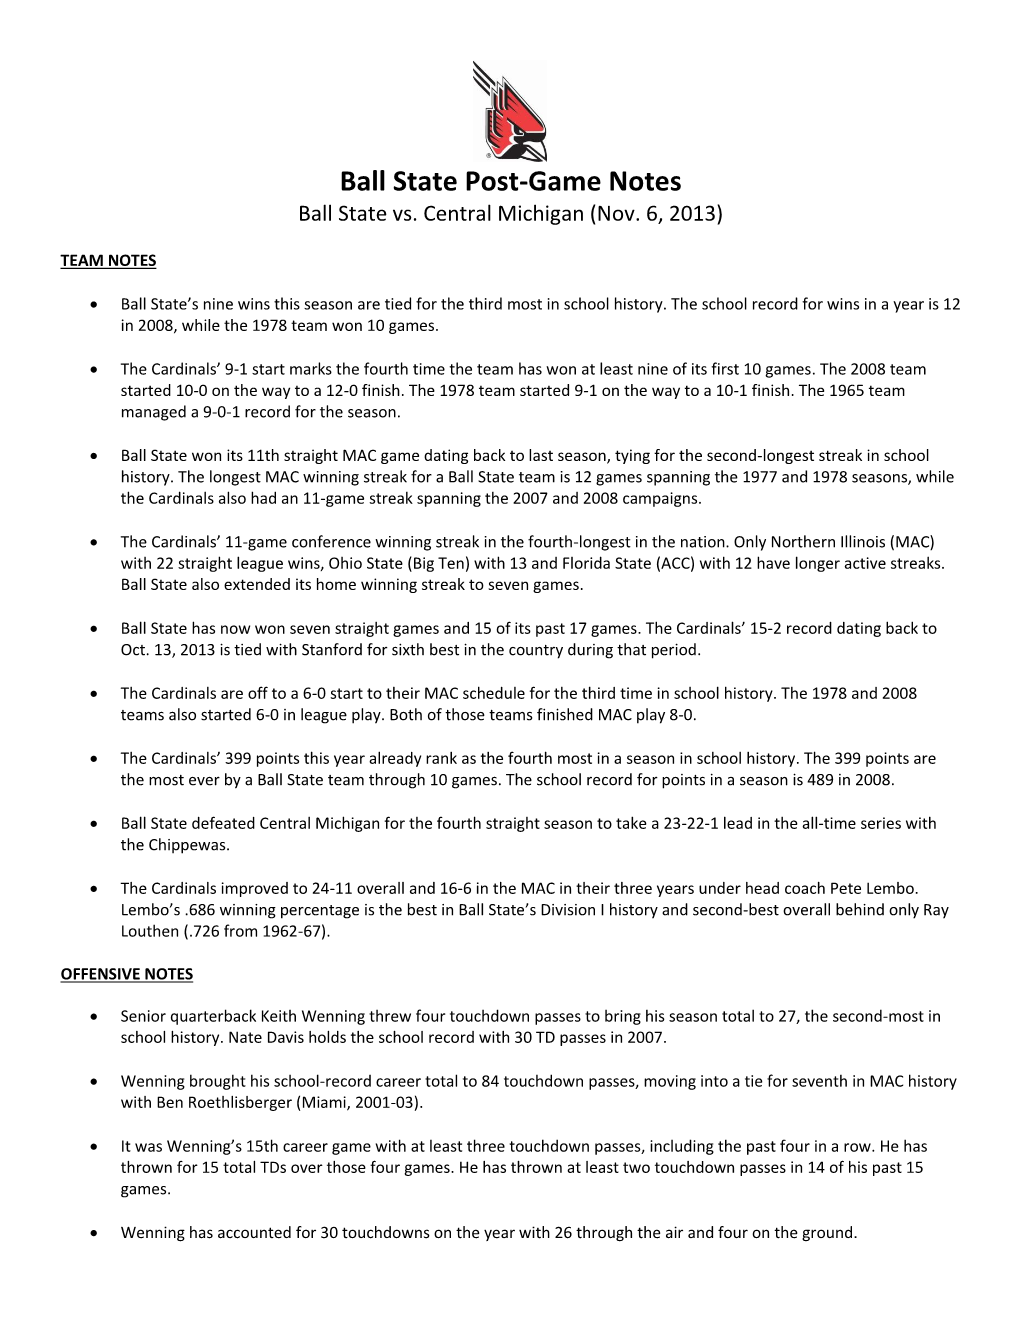 Ball State Post-Game Notes Ball State Vs